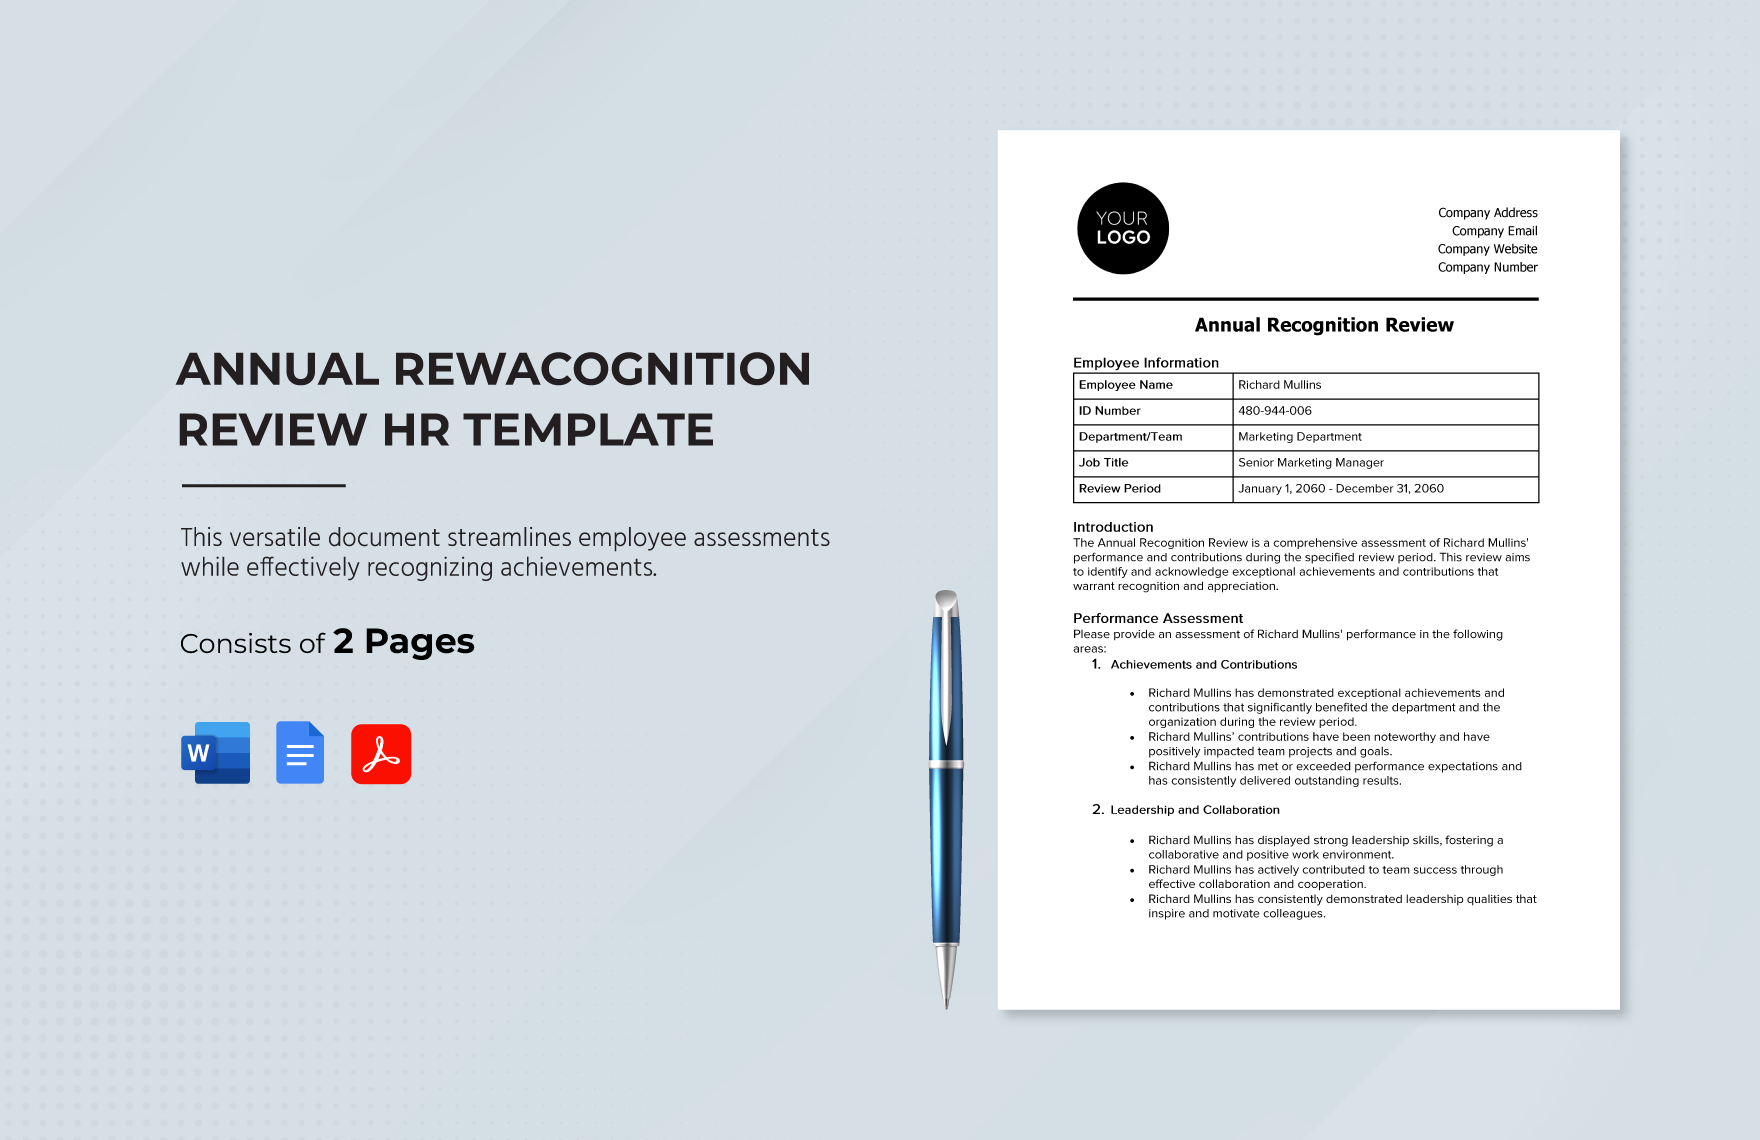 Annual Recognition Review HR Template